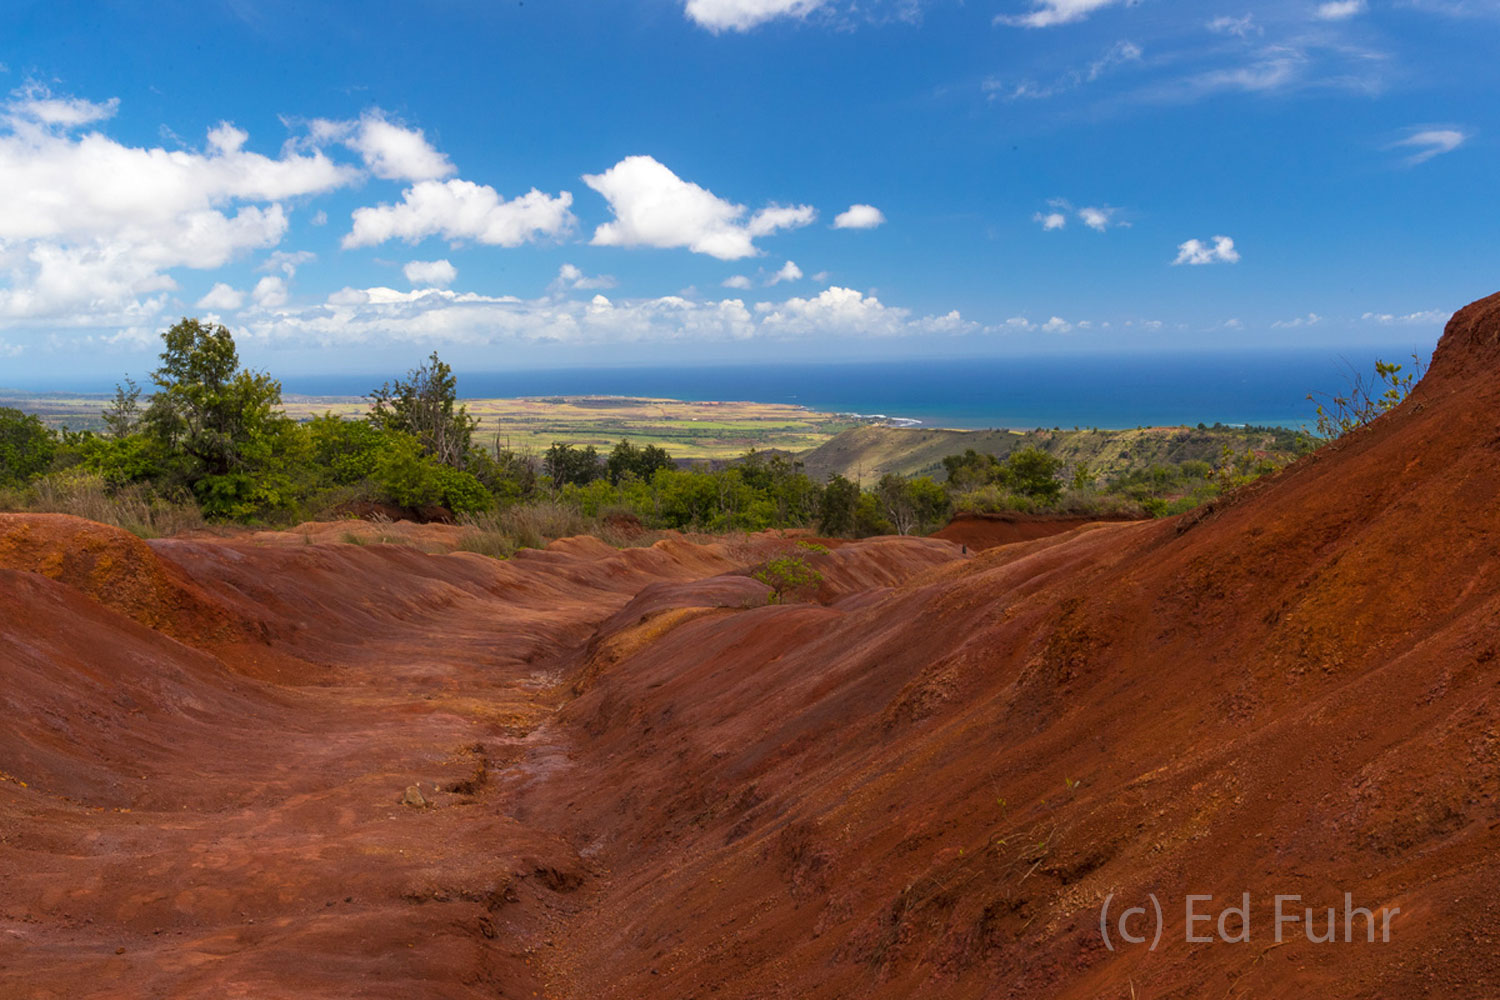 Just below Waimea Canyon lies these red dirt hills, carved over the years by water rushing to the sea.